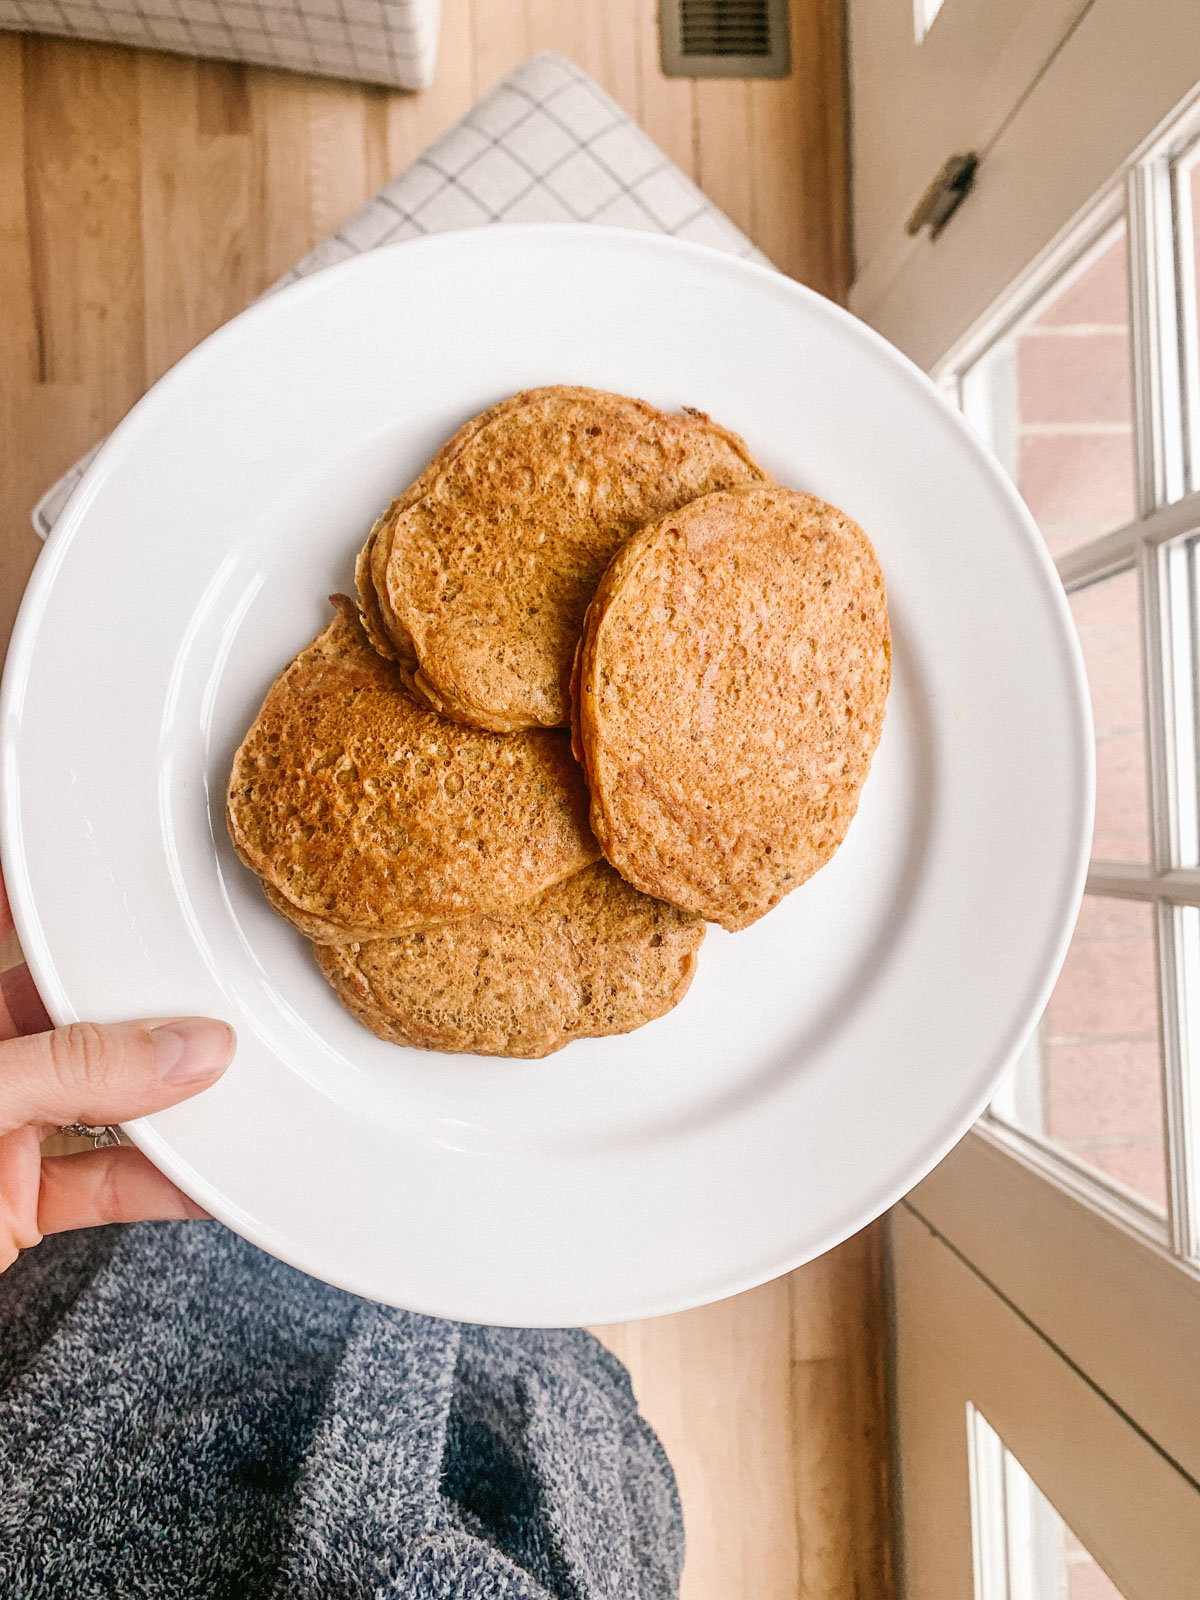 High fiber pancake recipe that kids and adults will both love.